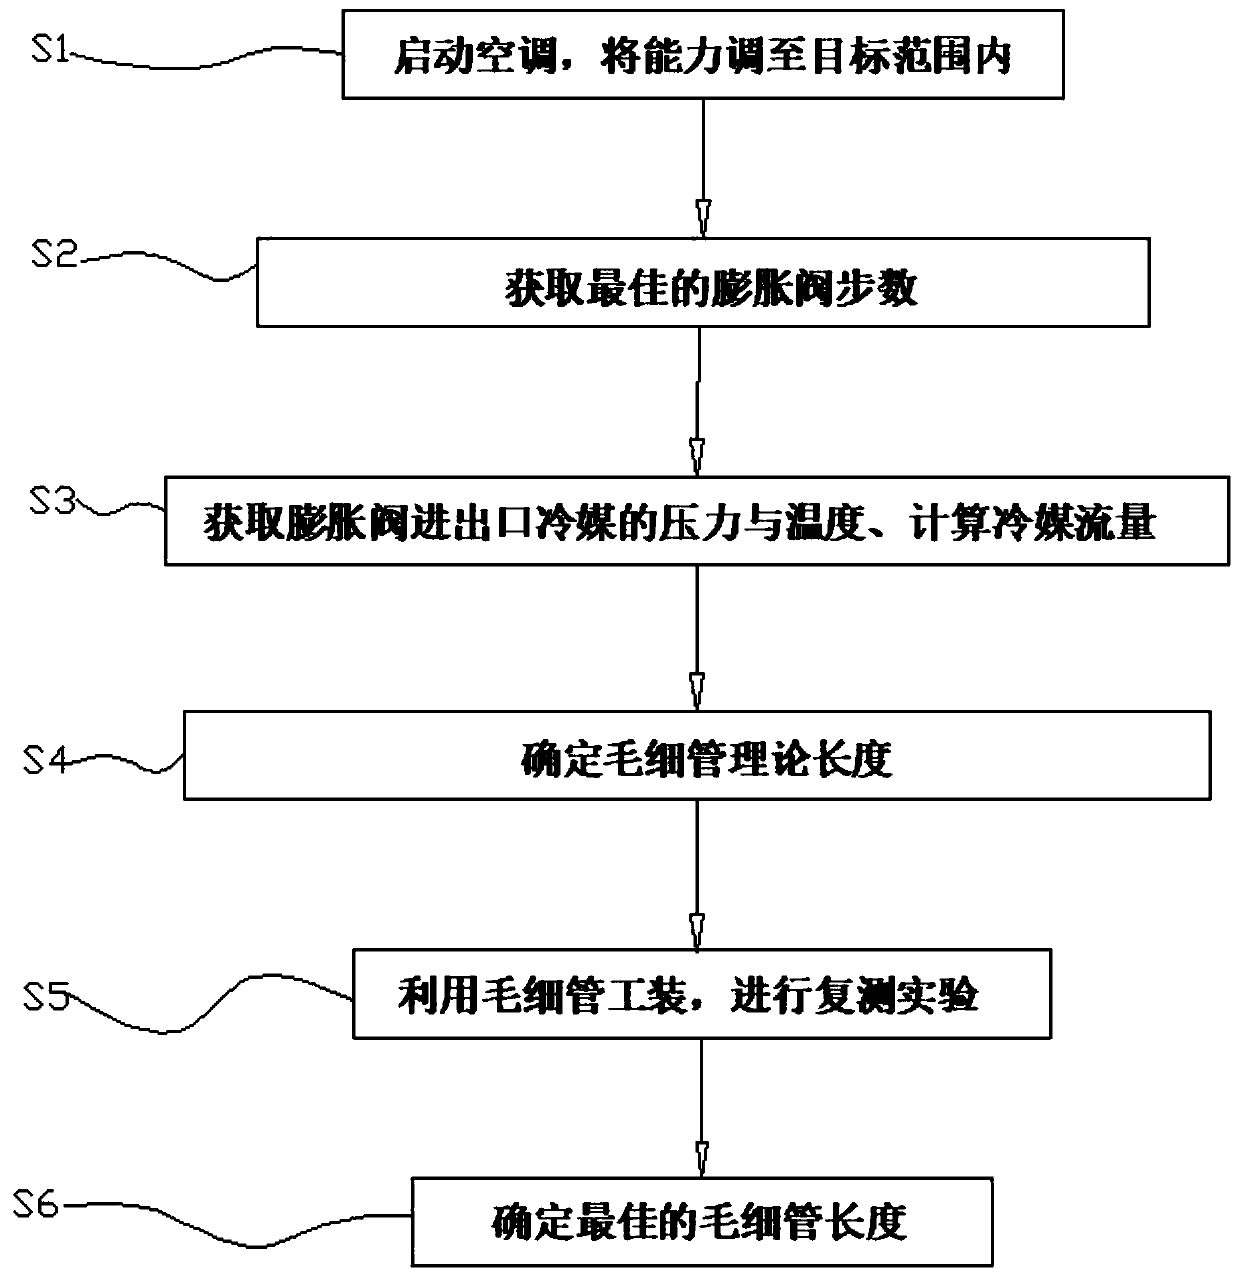 Air conditioner debugging system and method for confirming capillary tube length